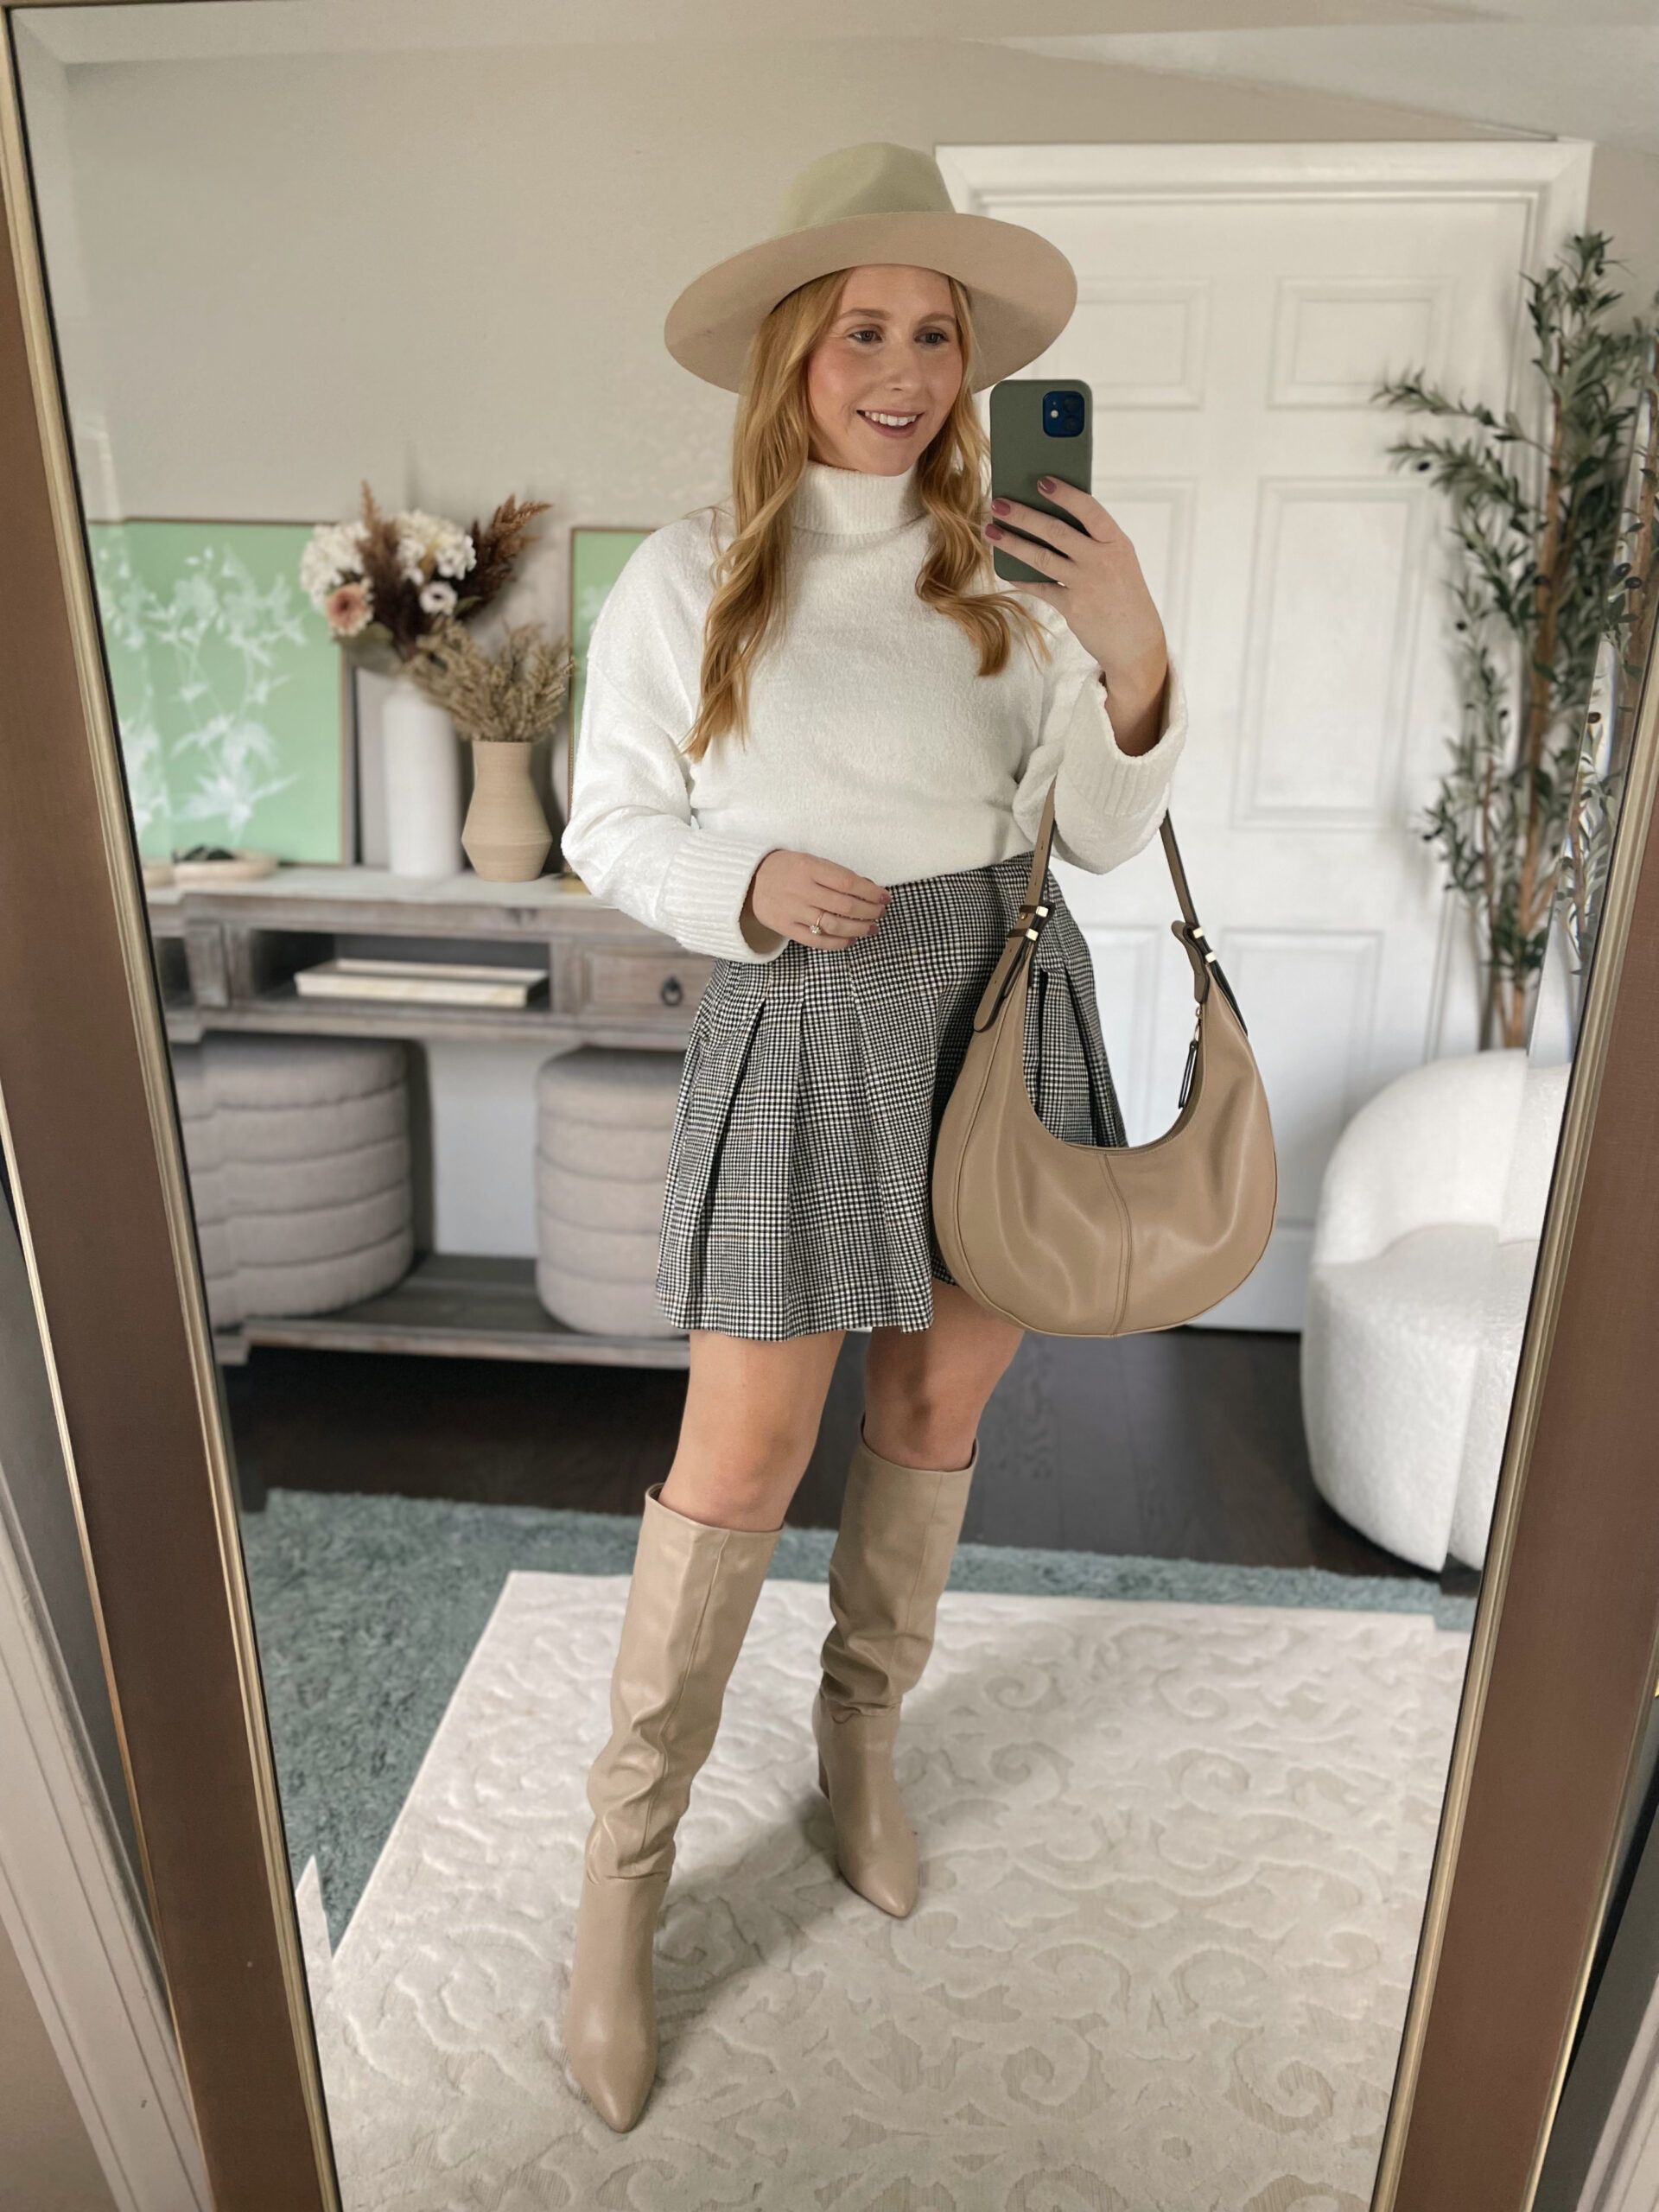 Affordable by Amanda shares 15 Trendy Fall Outfits for Fall 2023 | Fall 2023 Outfit Ideas | Stylish Fall Outfits for Women